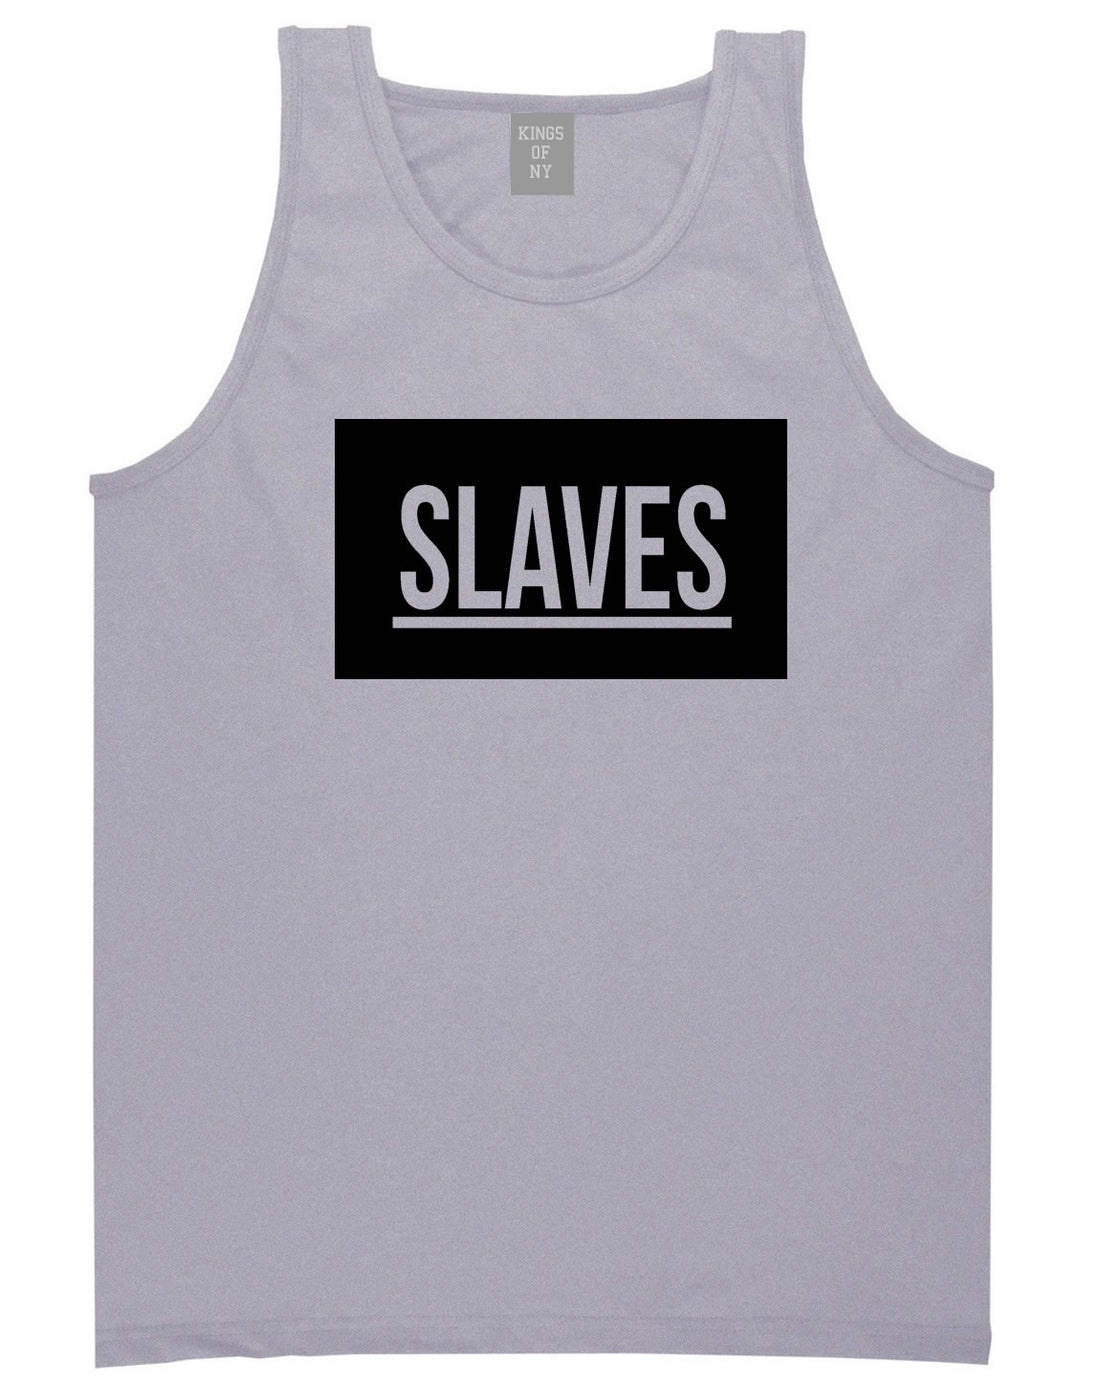 Slaves Fashion Kanye Lyrics Music West East Tank Top In Grey by Kings Of NY